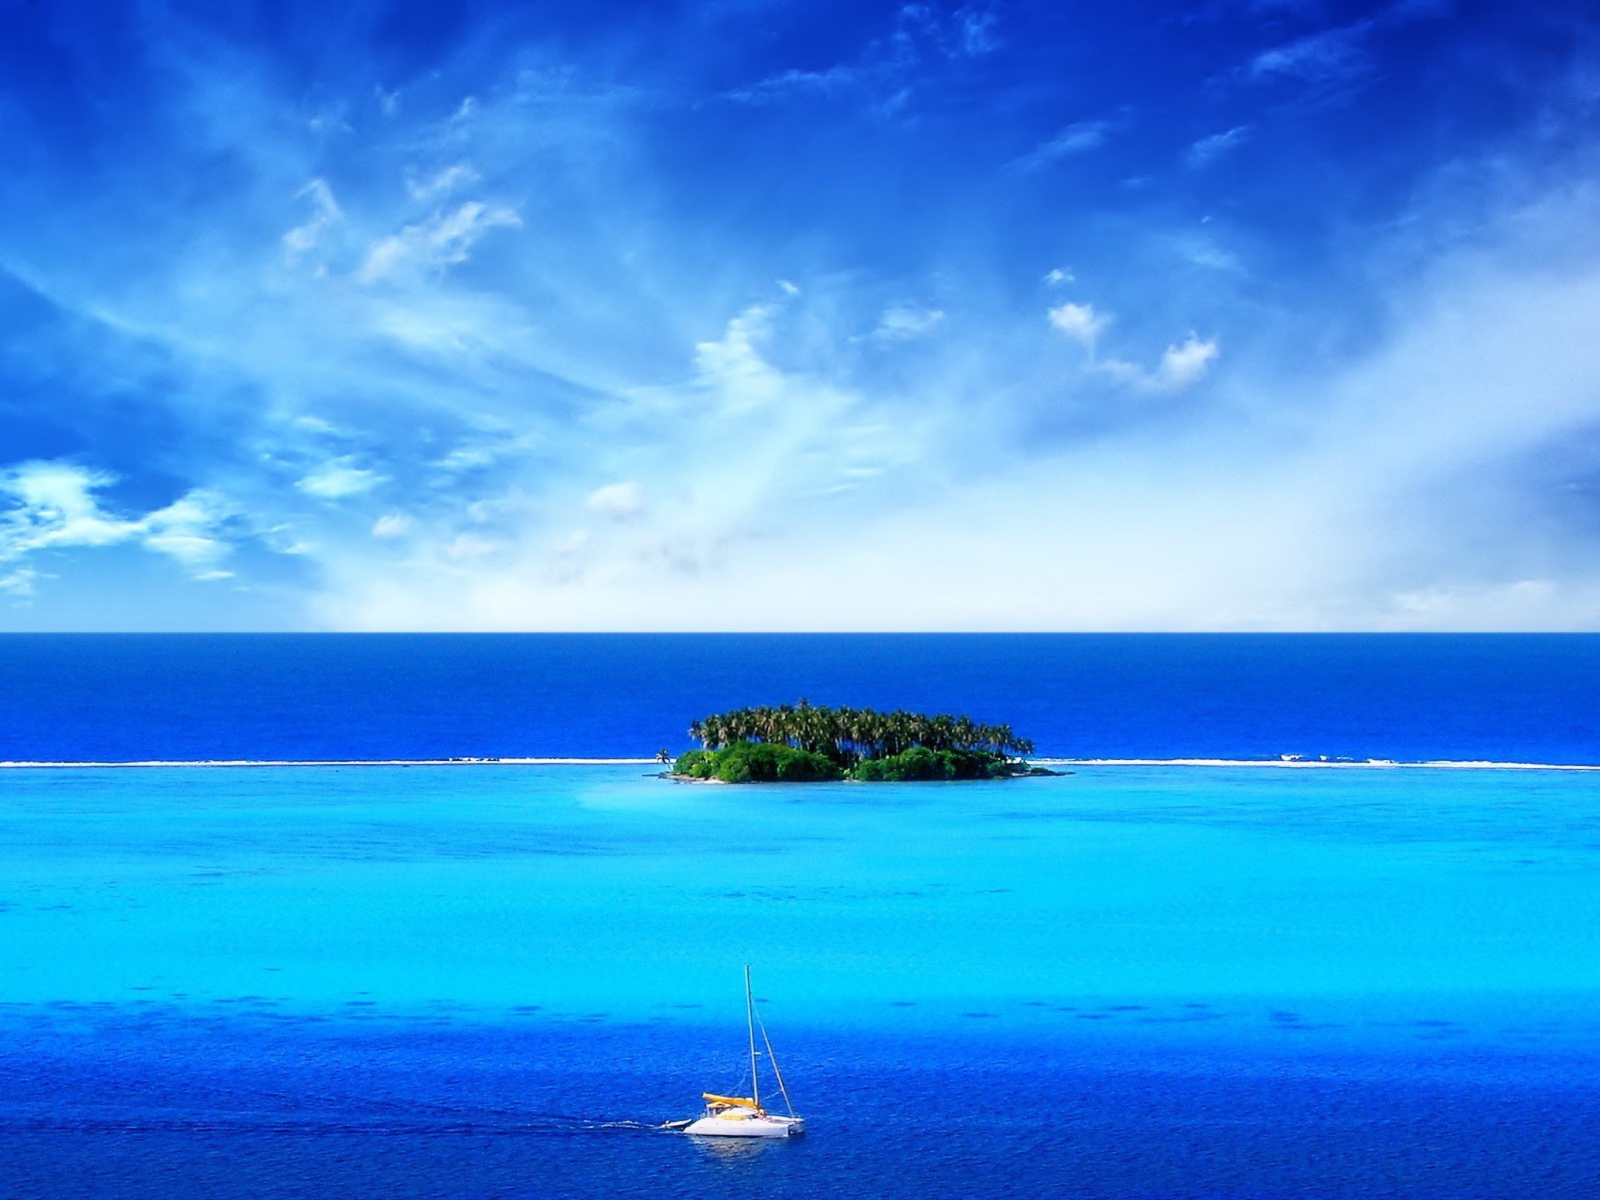 Green Island In Middle Of Blue Ocean And White Boat wallpaper 1600x1200